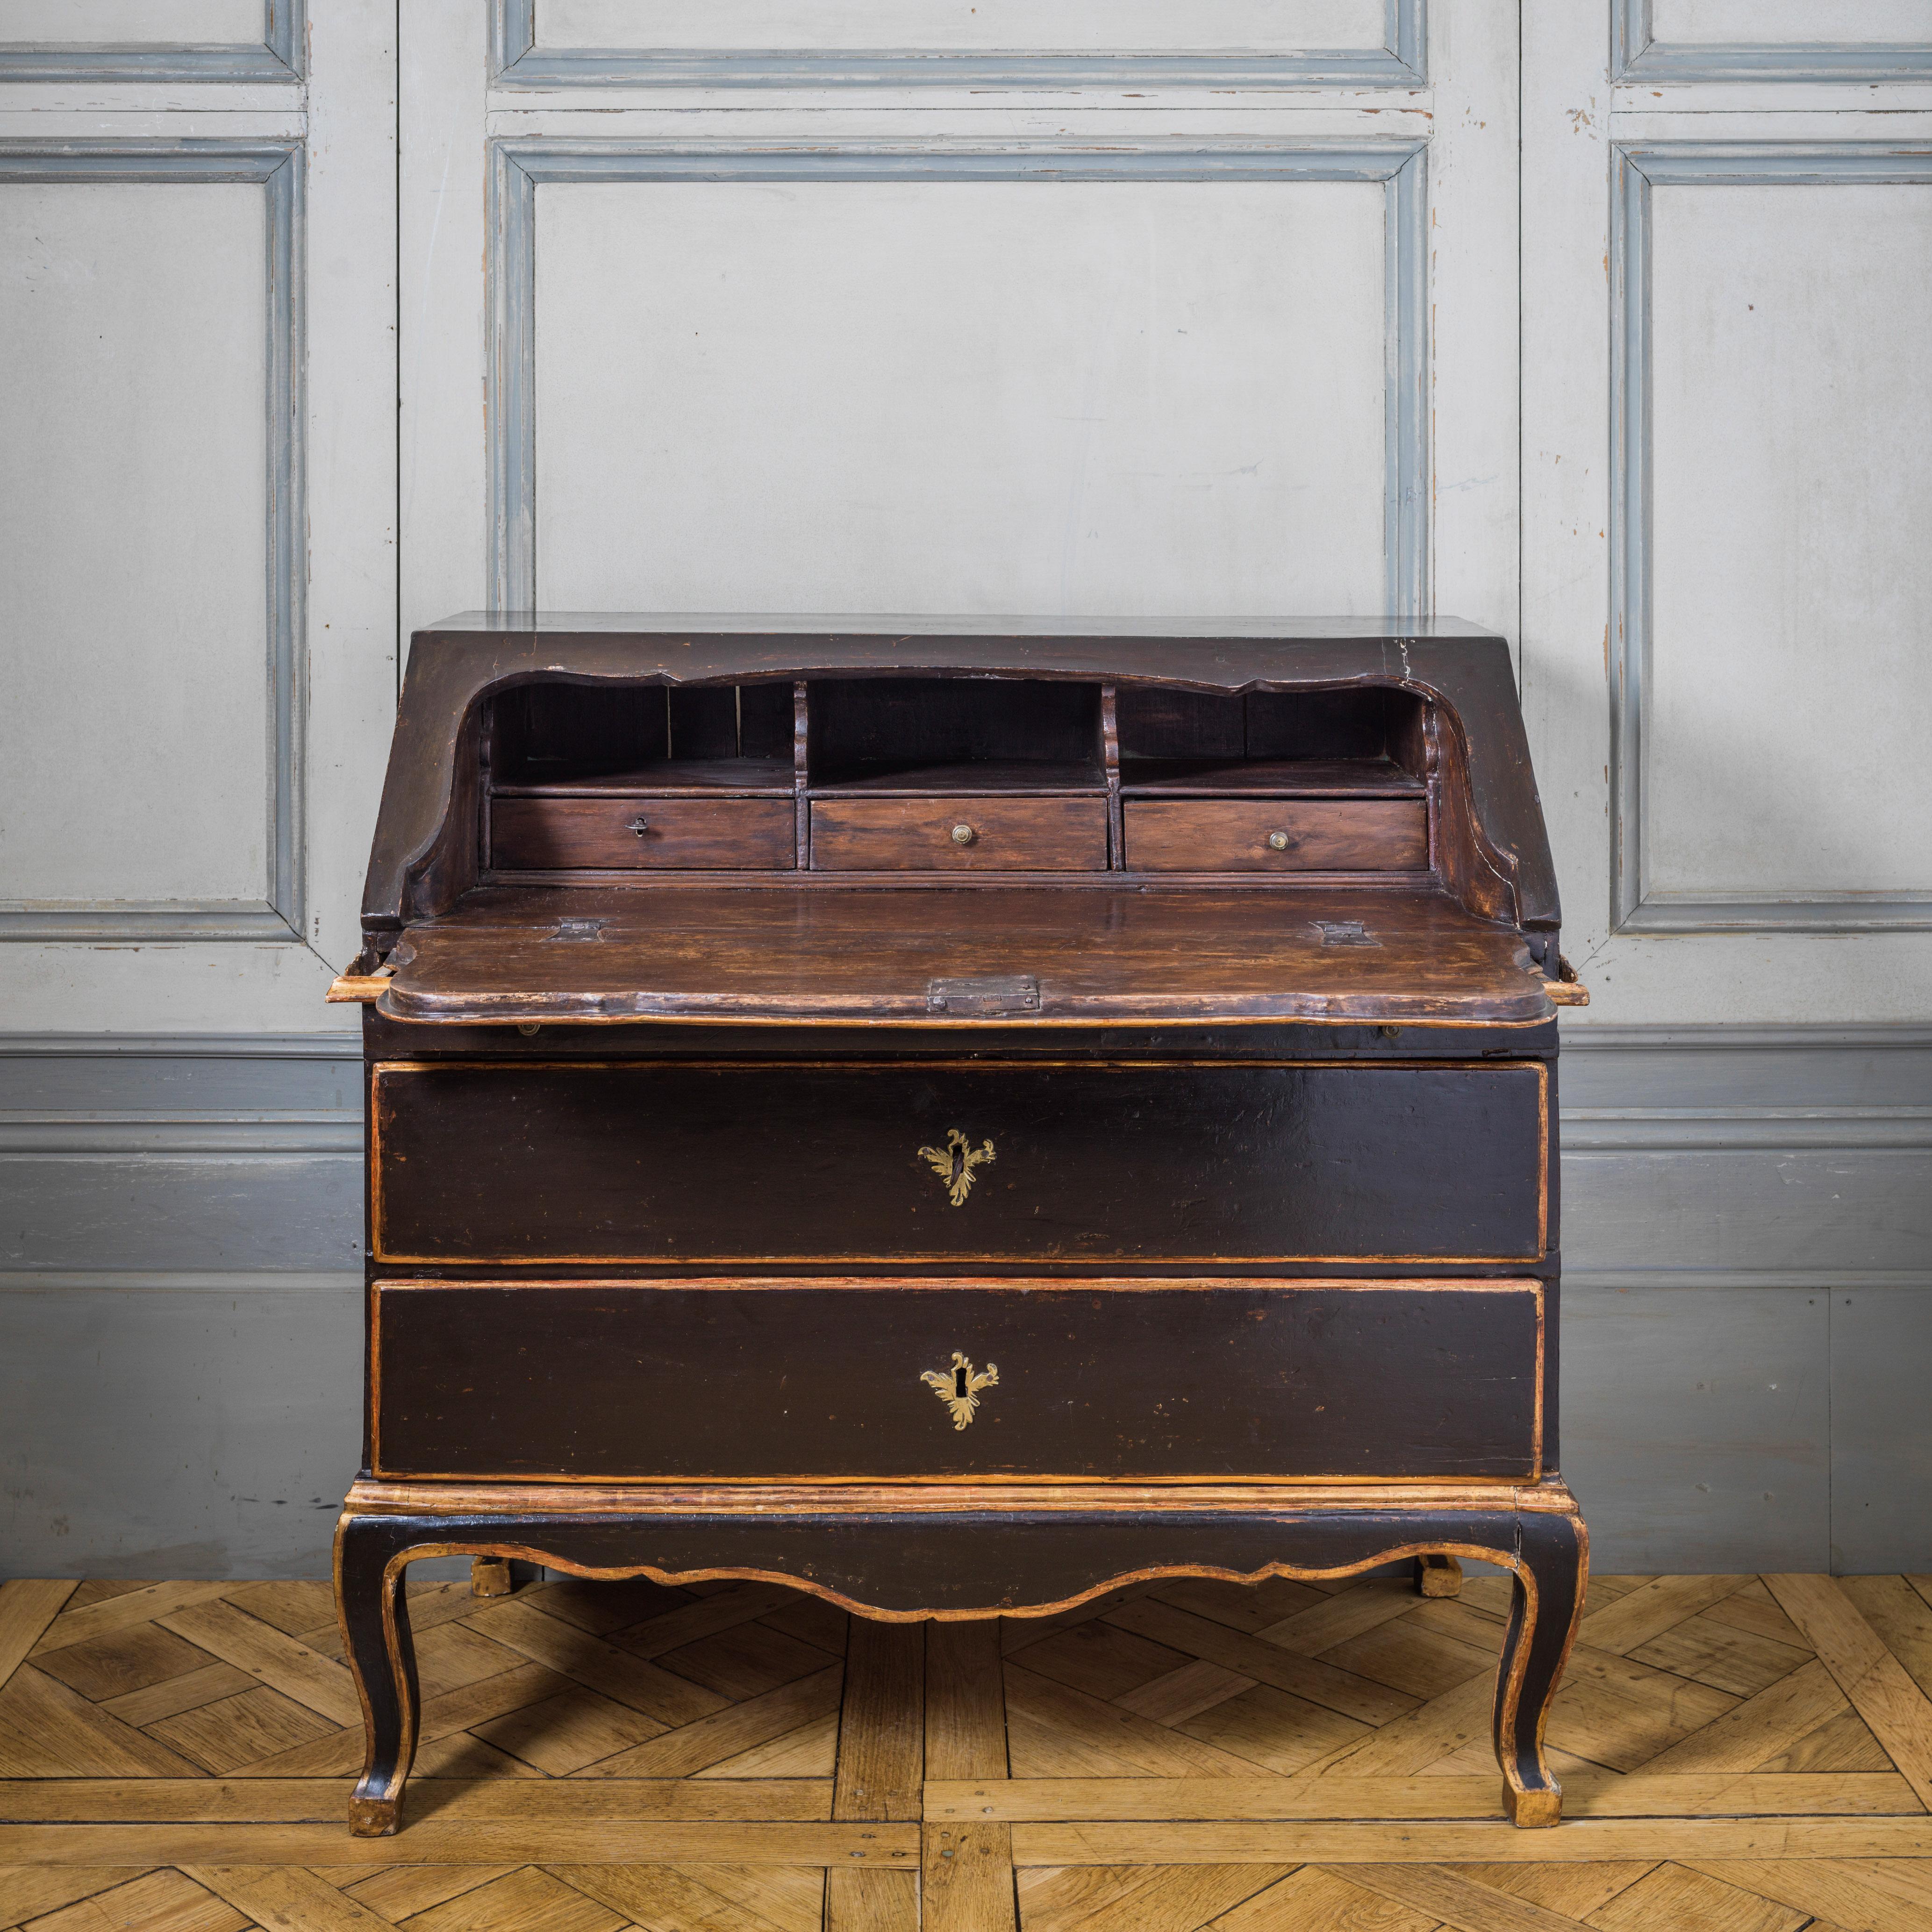 18th century Italian scriban from Tuscany. Wax polished, walnut wood finish on the interior and a black lacquer patina with gilded highlights on the exterior. Complete with original ormolu fittings.